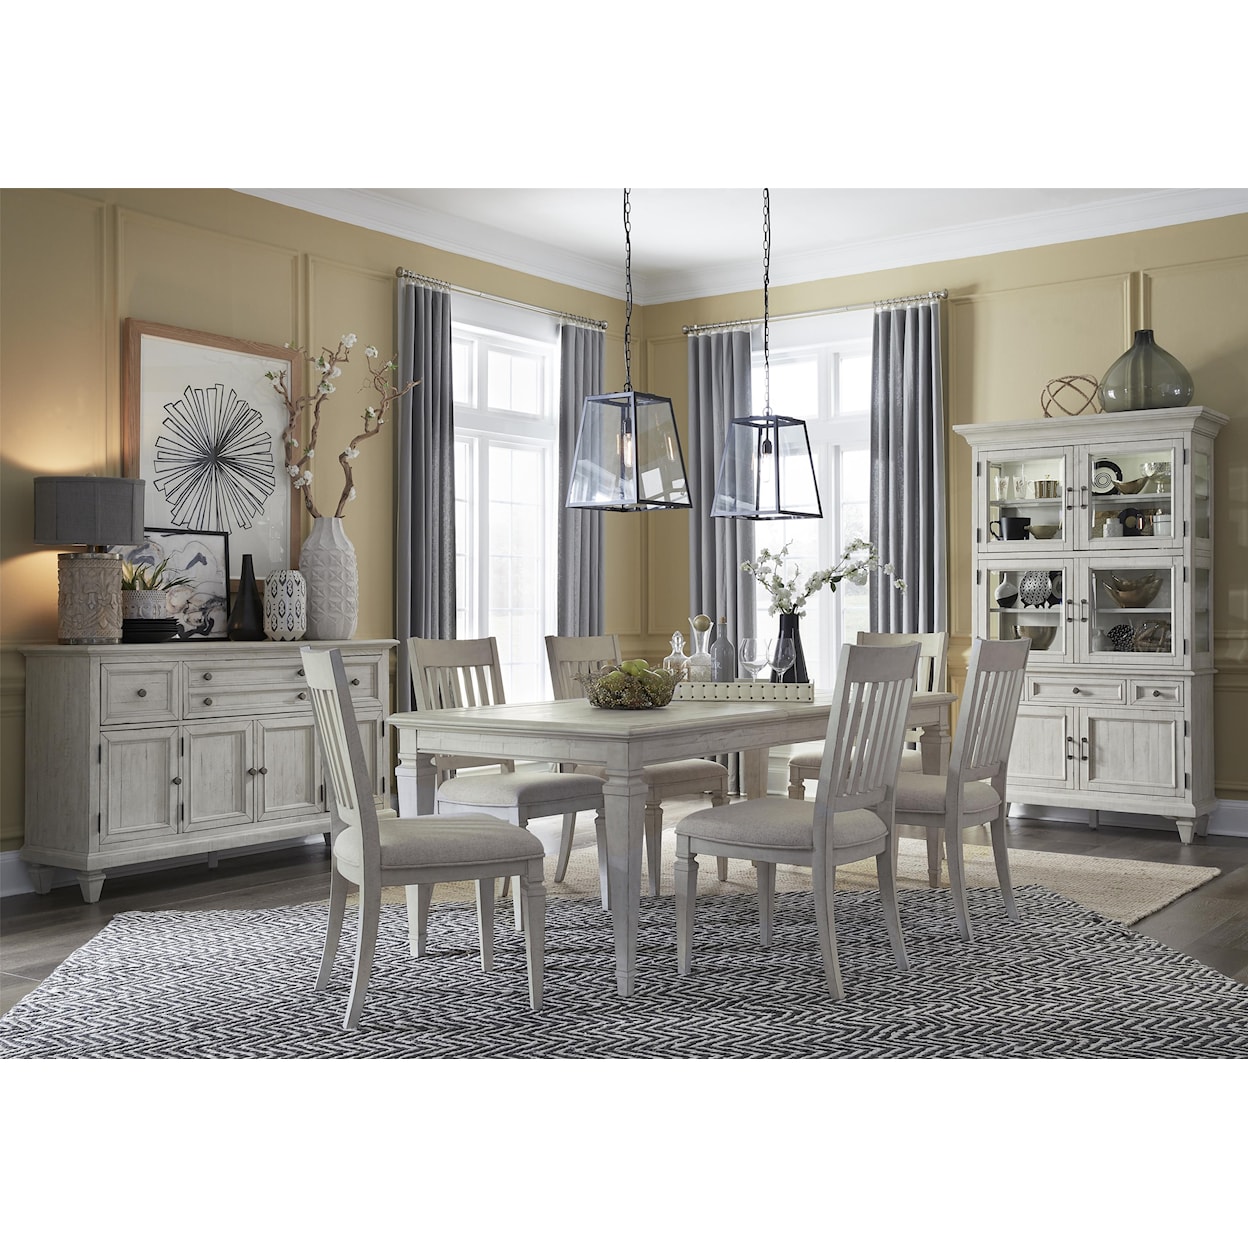 Magnussen Home Newport Dining Room Group 1